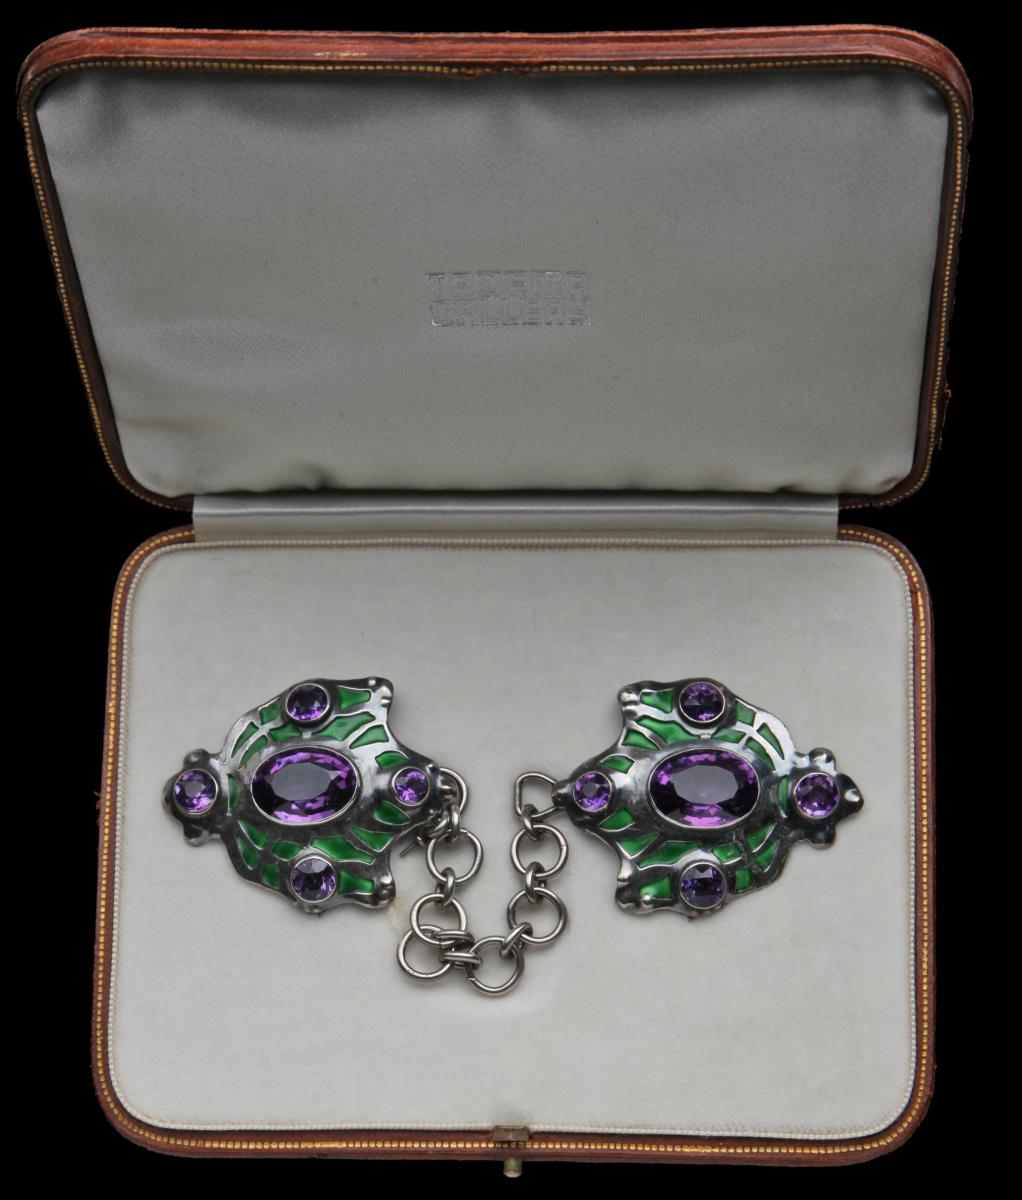 An Impressive Arts & Crafts Cloak Clasp Attributed to GUILD OF HANDICRAFT LTD. (worked 1888-1908)